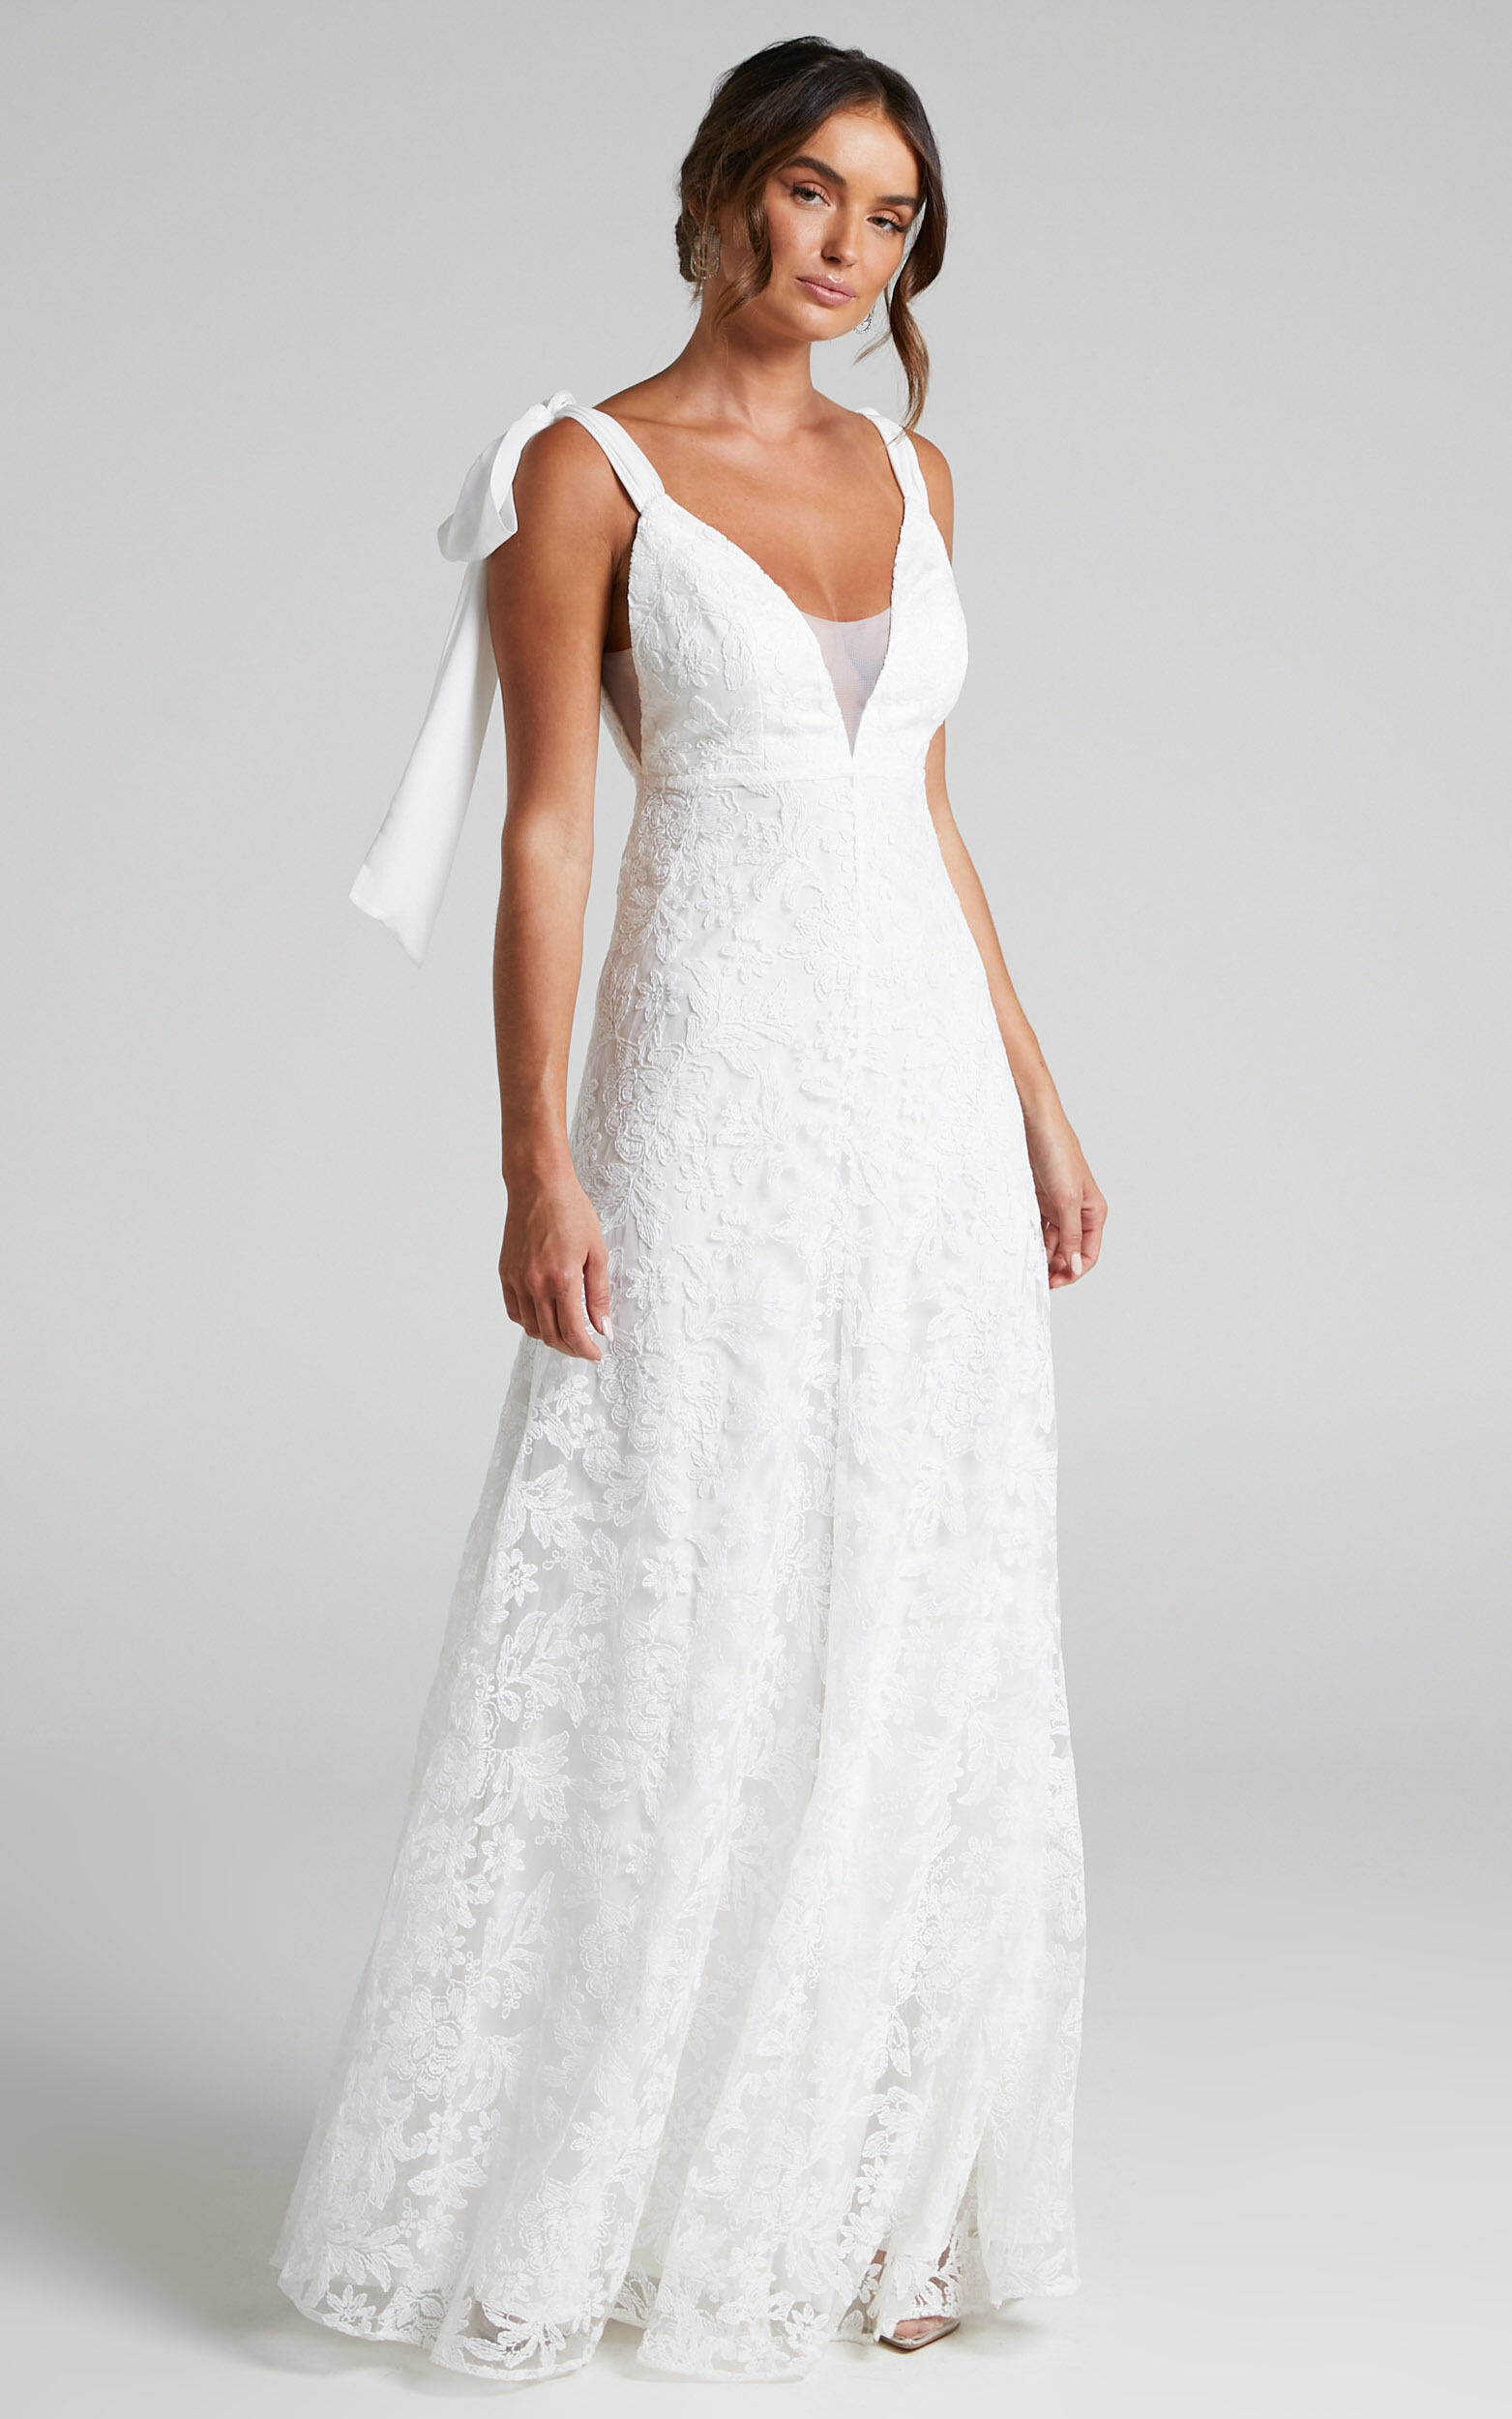 Petunia Gown - Tie Shoulder Plunge Neck Lace Gown in Ivory - 06, WHT1